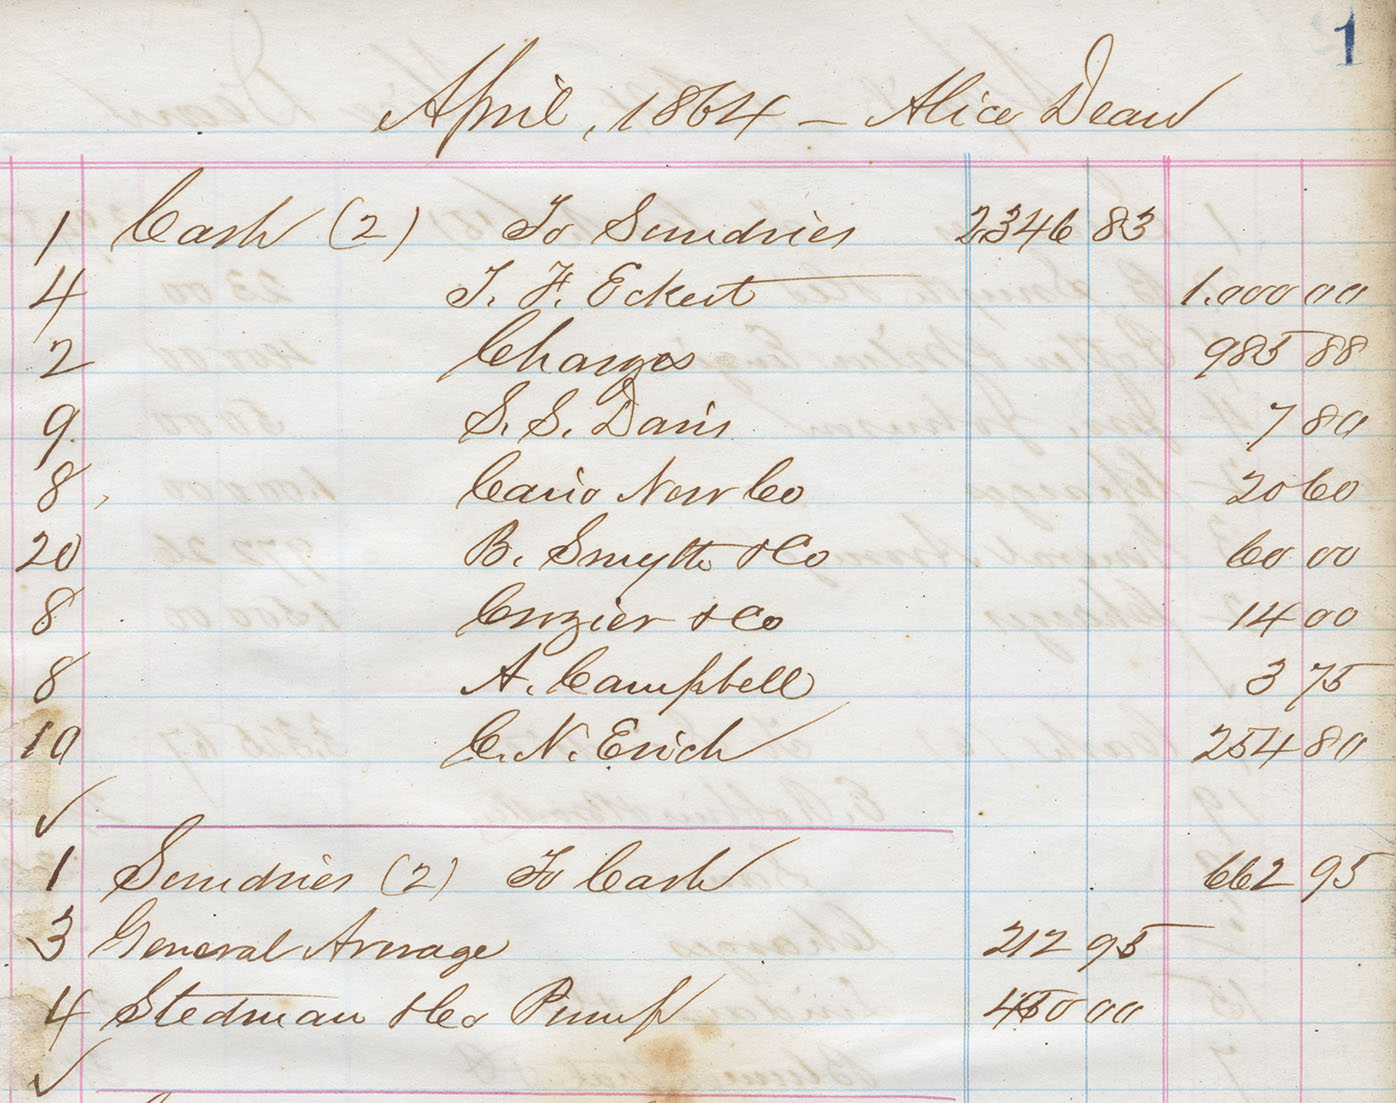 Excerpt from an insurance ledger for the Alice Dean